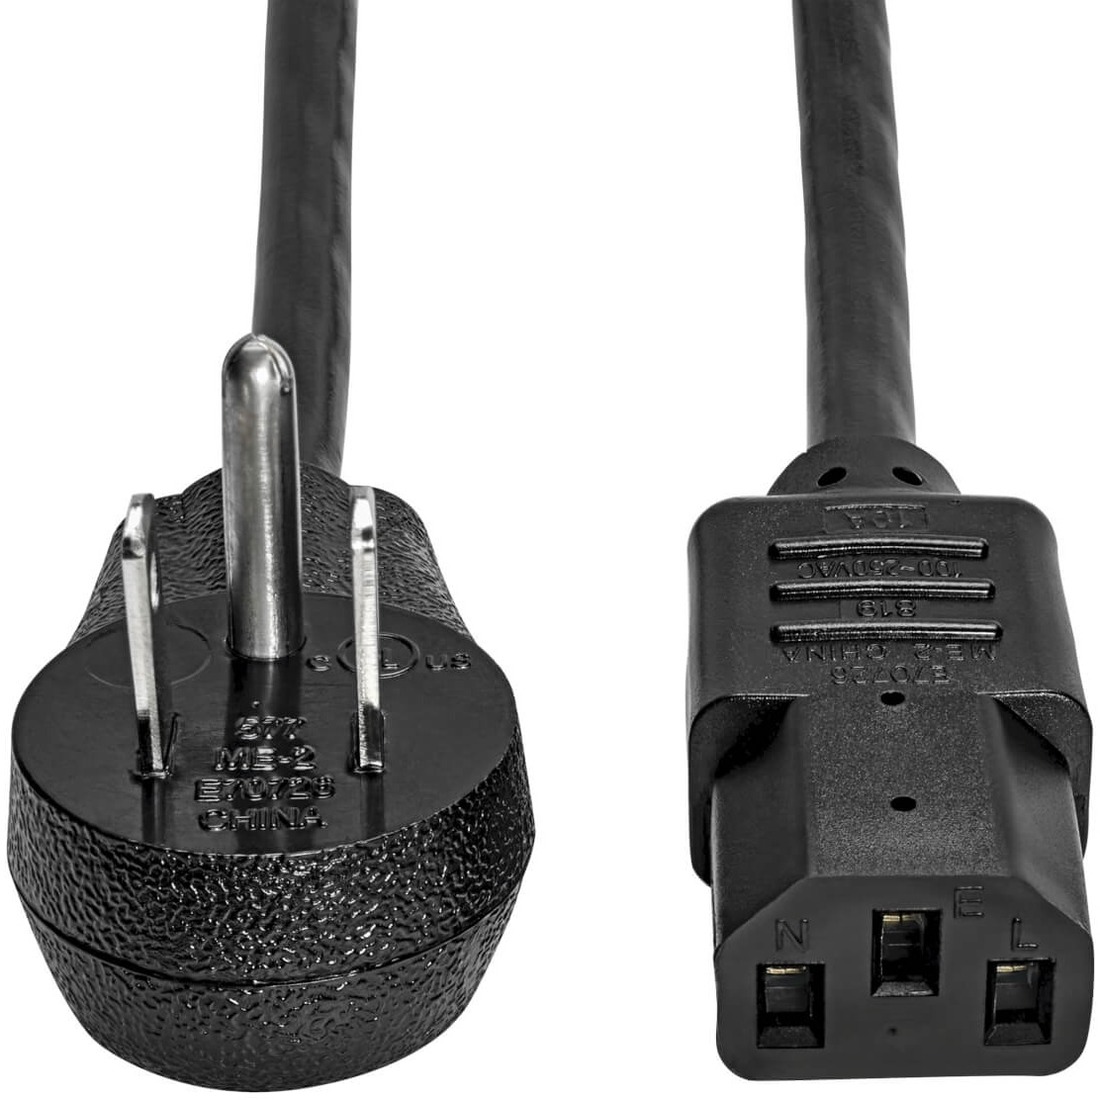 Tripp Lite Computer Power Cord Right-Angle 5-15P to C13 15A 125V 14AWG 2ft